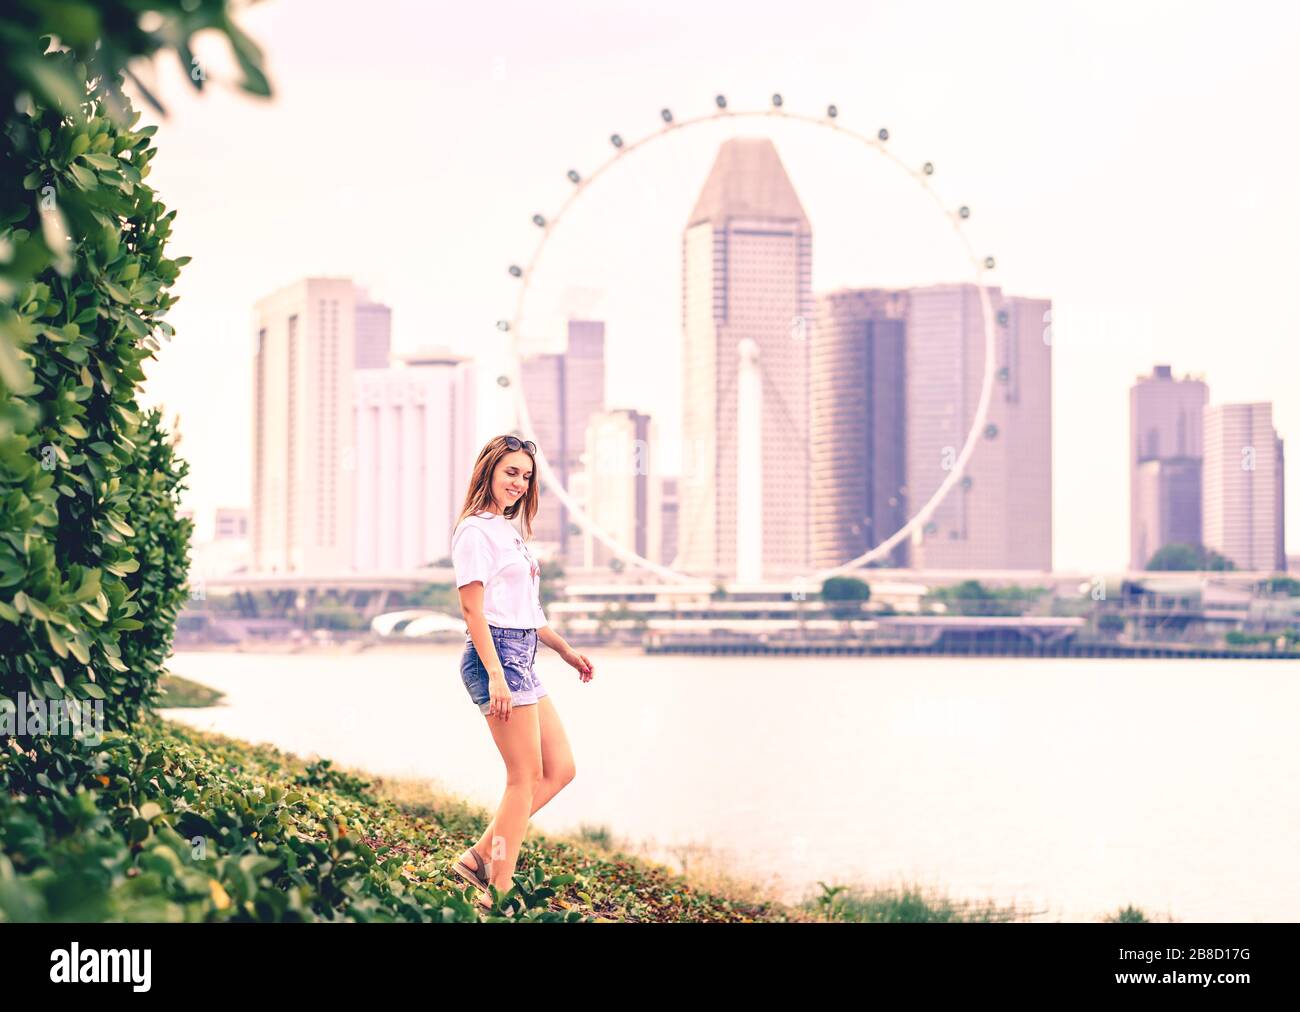 Positive trendy woman in jeans shorts walking in an outdoor park with urban city downtown skyline in the background. Happy fashion lifestyle. Stock Photo